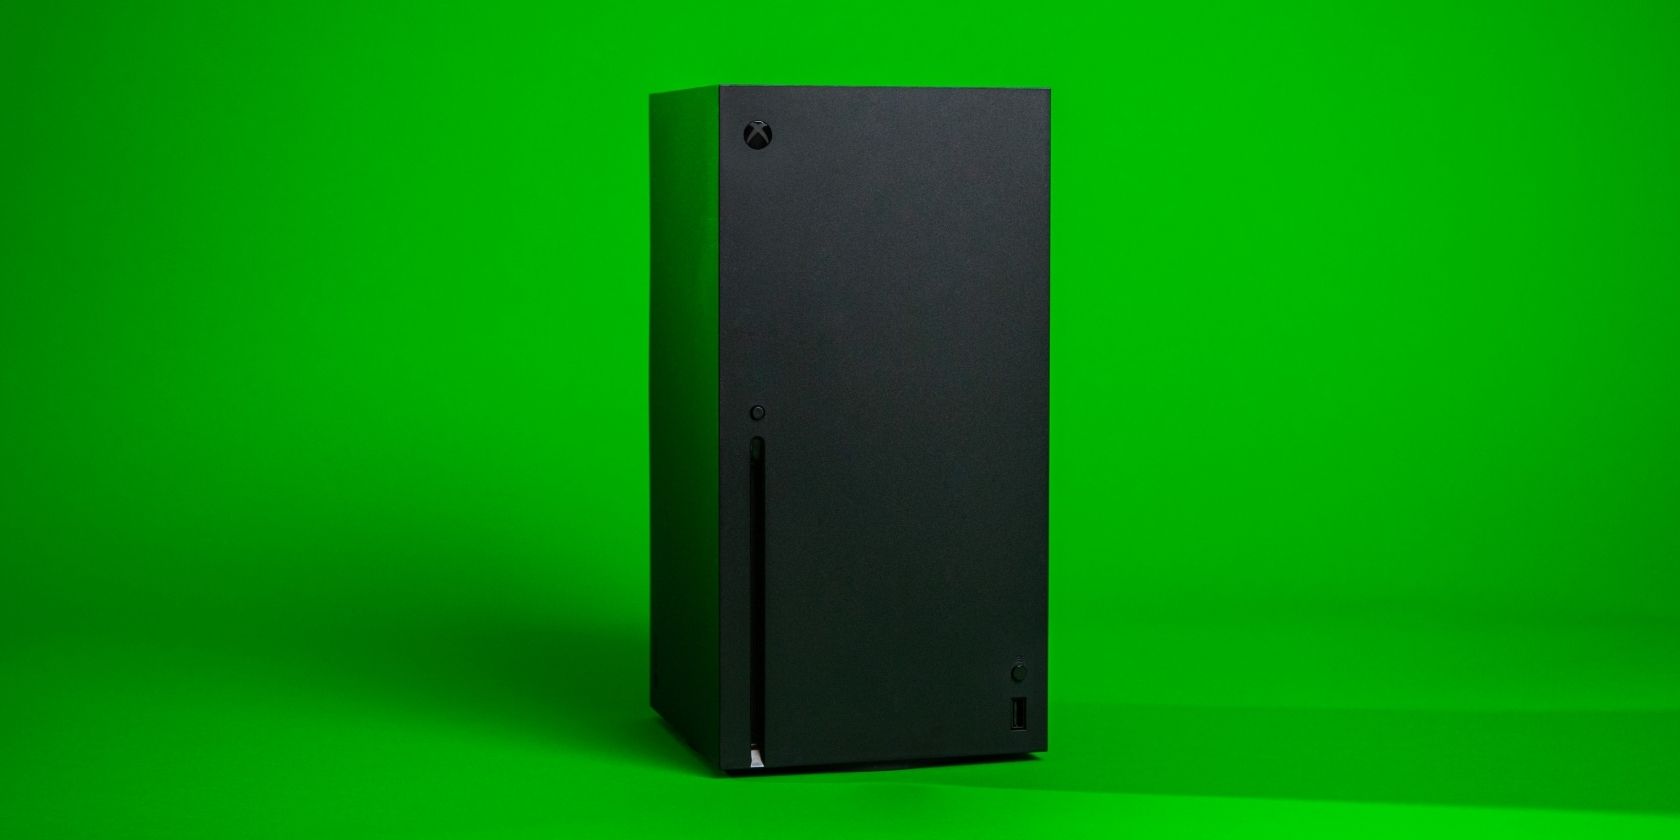 A photograph of an Xbox Series X console in front of a bright green background